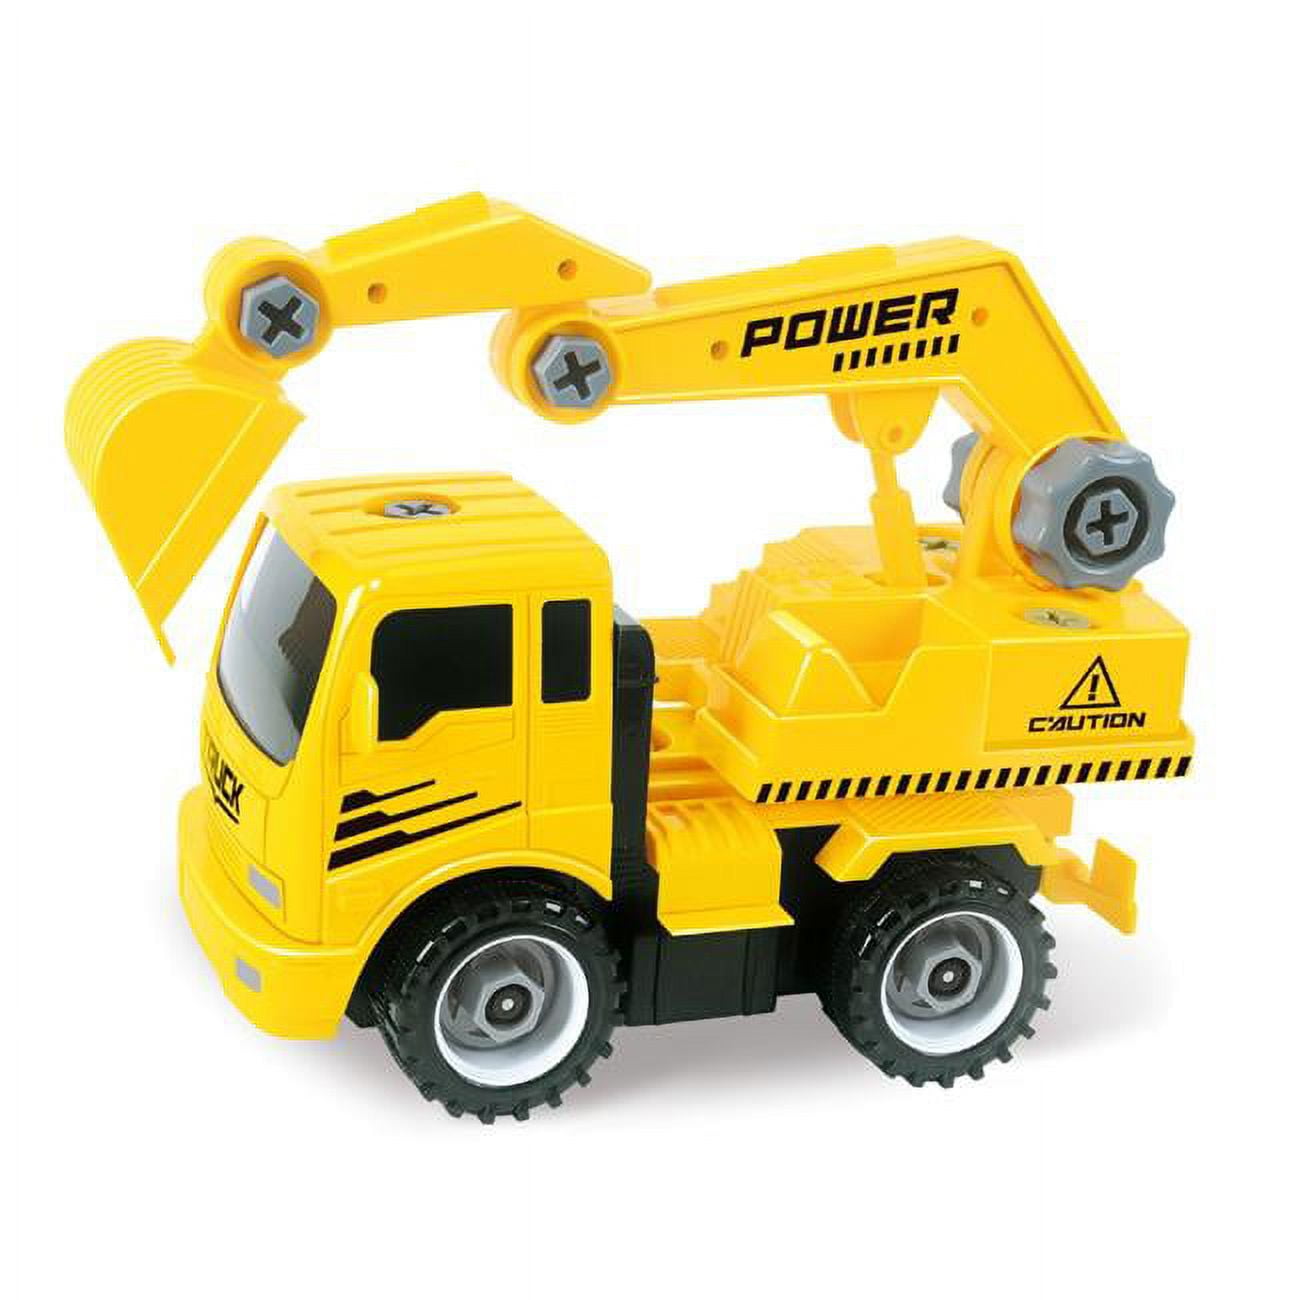 T29a Take A-part Construction Truck With 4 Different Forms, Dump Truck, Crane, Cement Mixer, Excavator